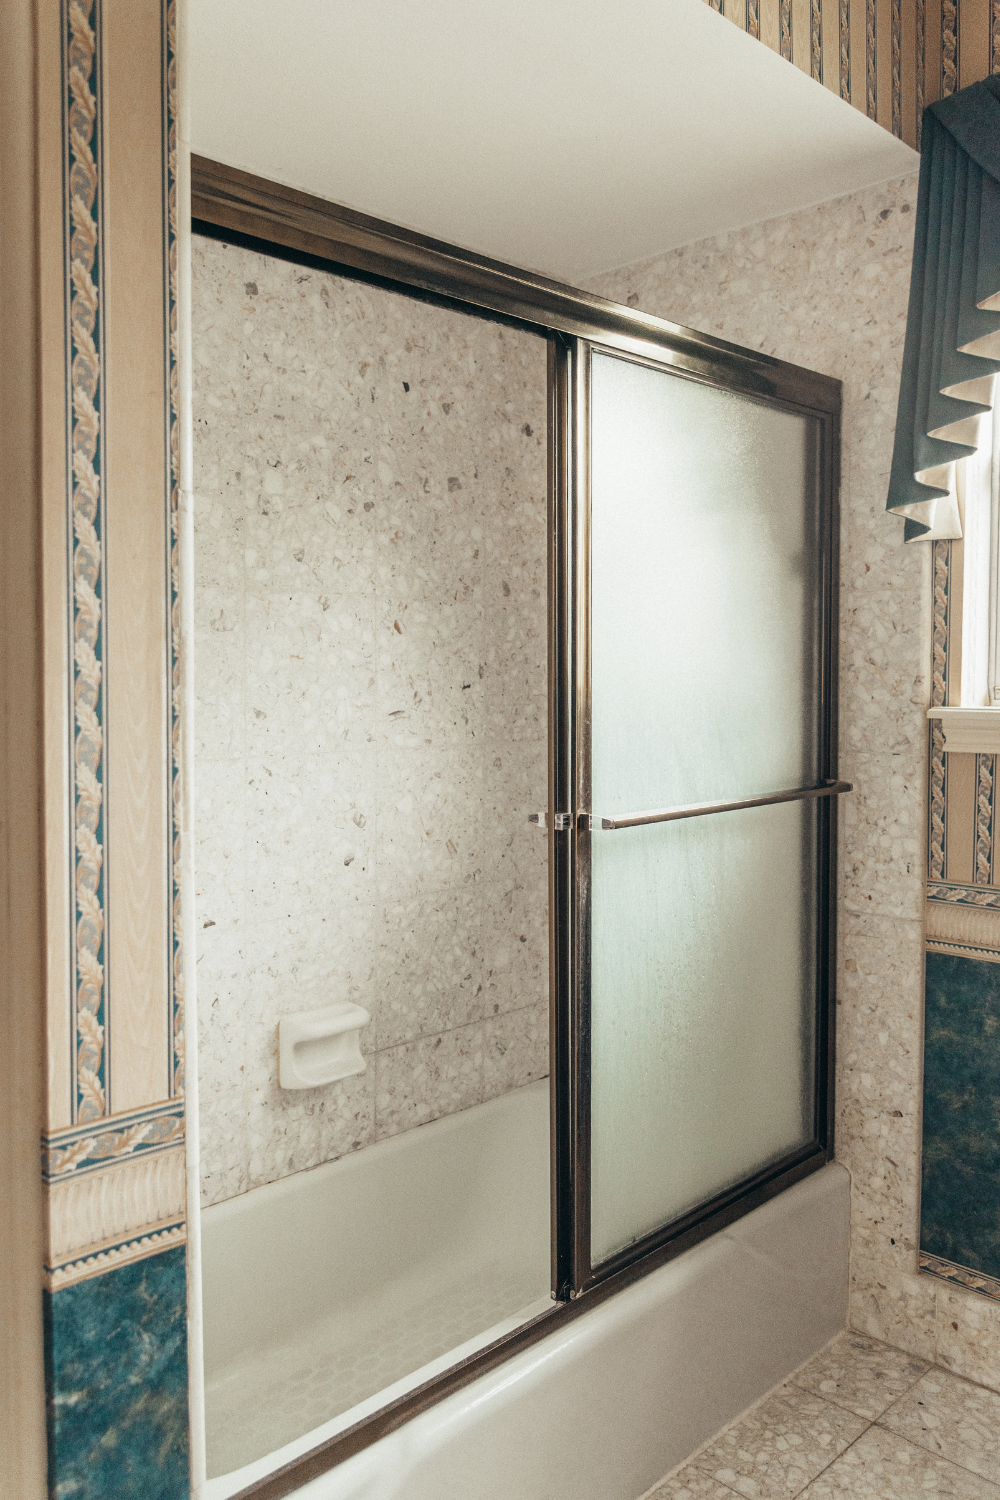 1970s bathroom before the renovation, showing its dated look